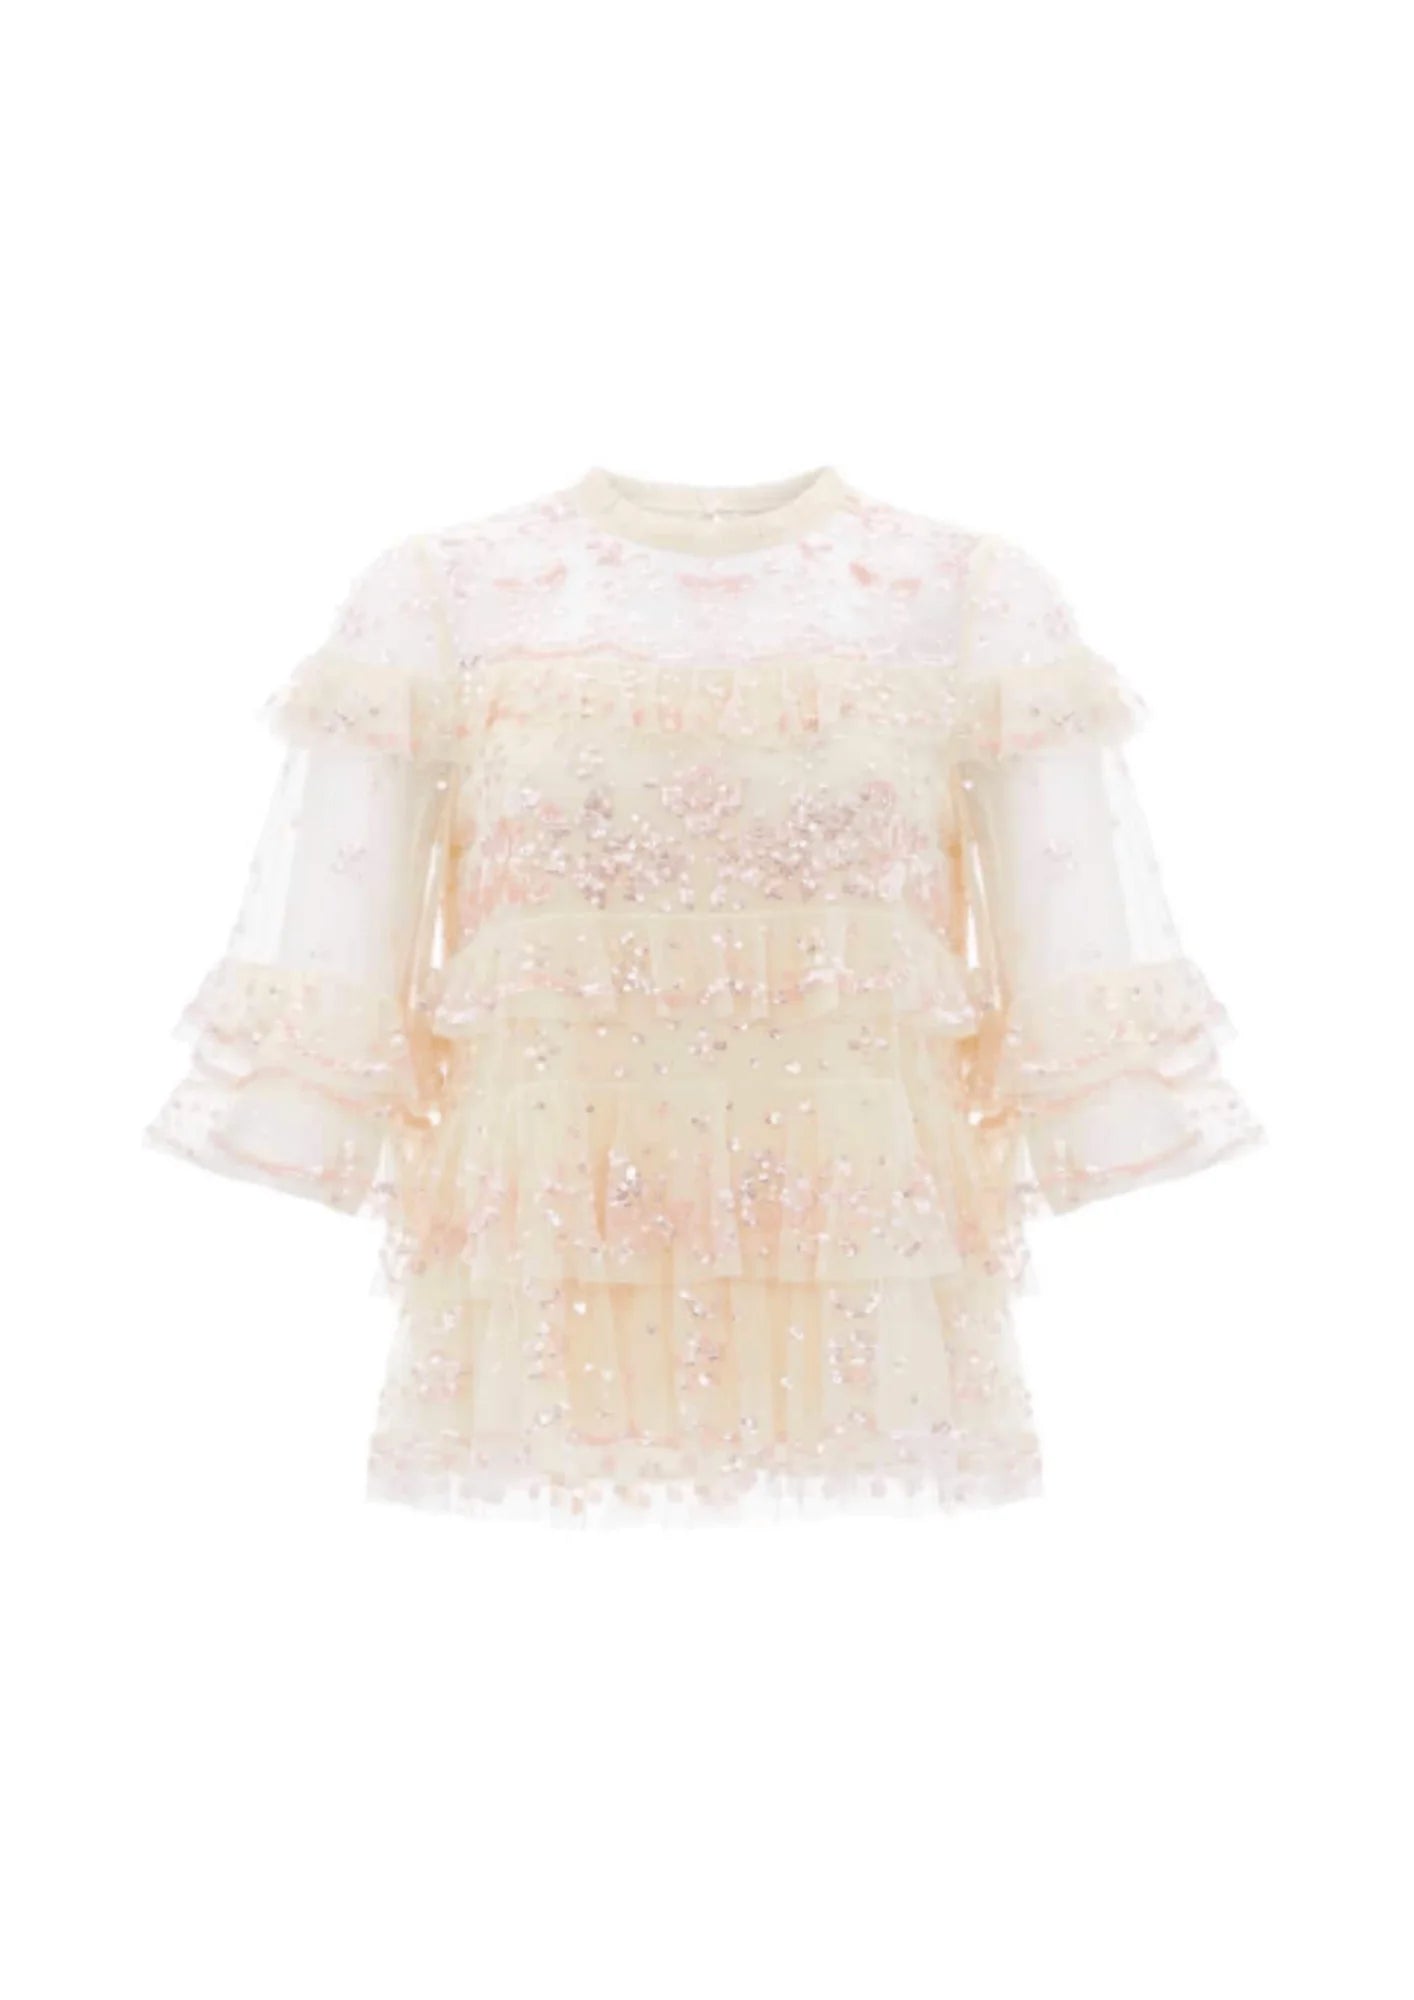 YELLOW TULLE AND SEQUINS TOP ELOISE